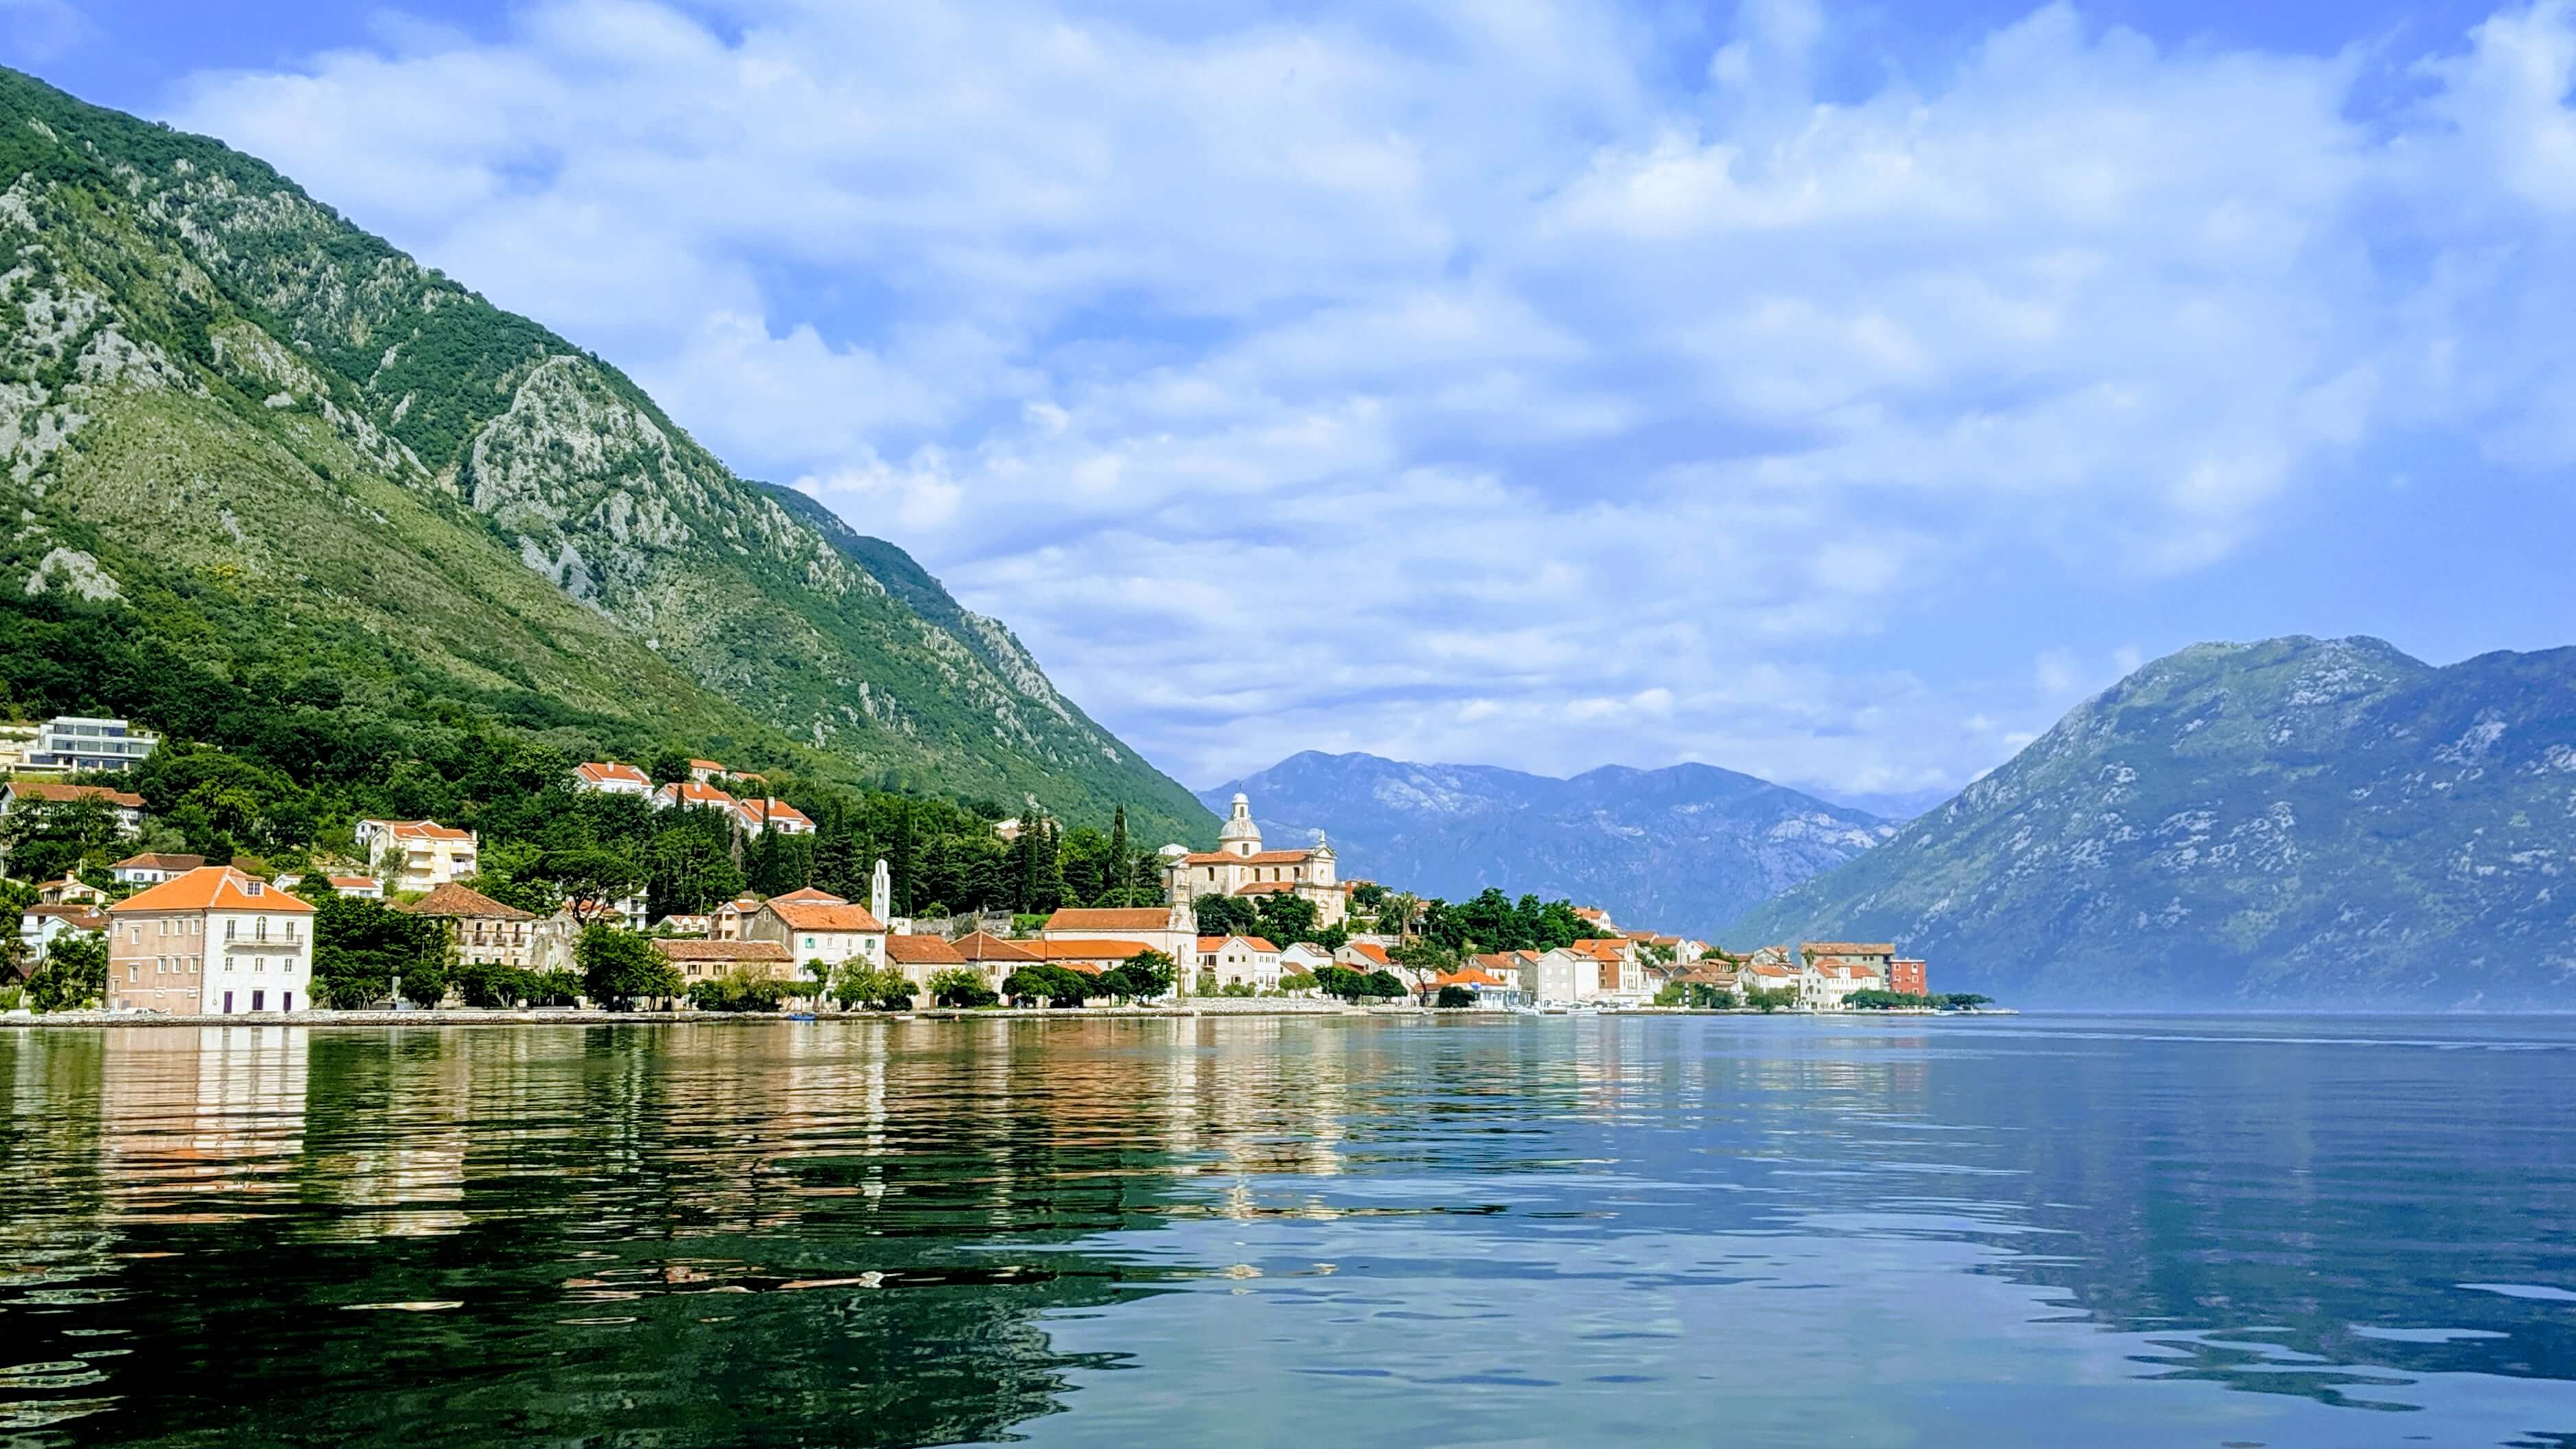 A reflection of a medieval town on Kotor Bay.  One of the top things to see and do in Montenegro,